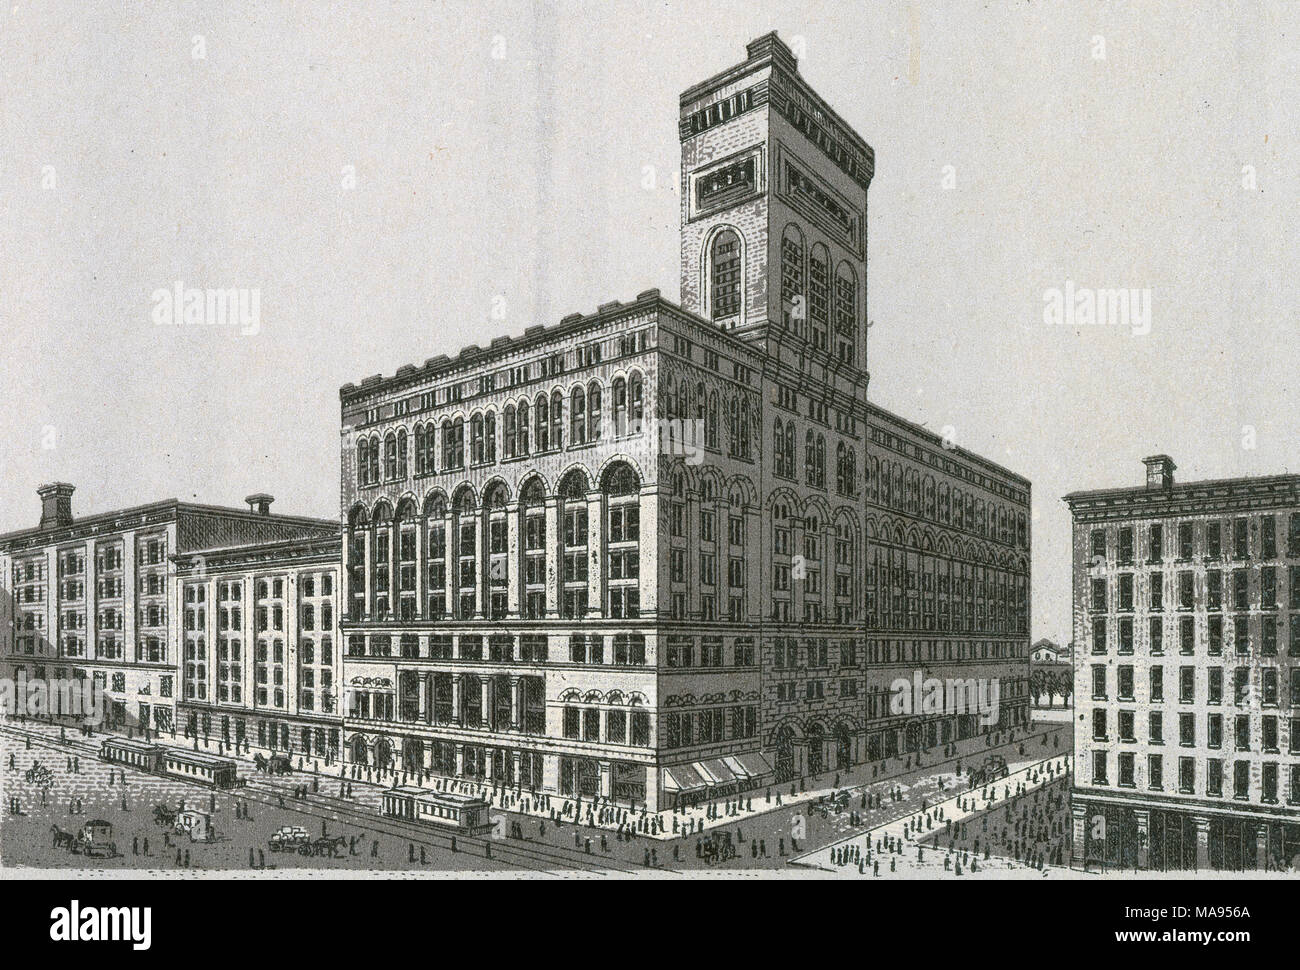 Antique c1890 monochromatic print from a souvenir album, showing Auditorium Building in Chicago, Illinois. The Auditorium Building in Chicago is one of the best-known designs of Louis Sullivan and Dankmar Adler. Completed in 1889, the building is located at the northwest corner of South Michigan Avenue and Congress Street (now Congress Parkway). Printed with the Glaser/Frey lithographic process, a multi-stone lithographic process developed in Germany. Stock Photo